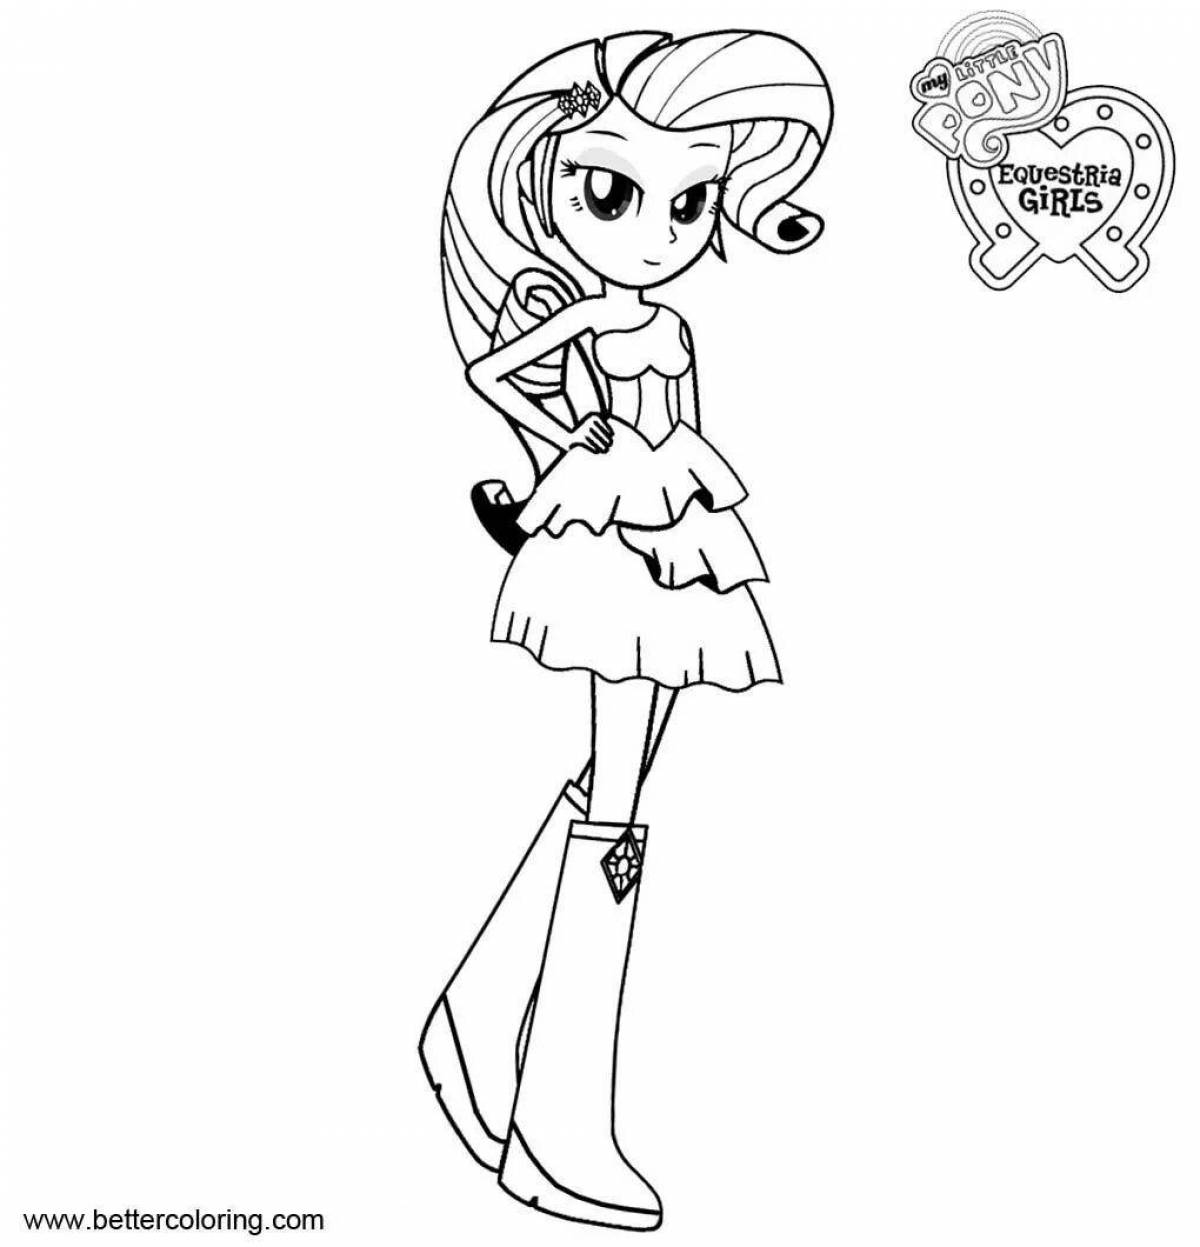 Dazzling coloring page pony my little pony equestria